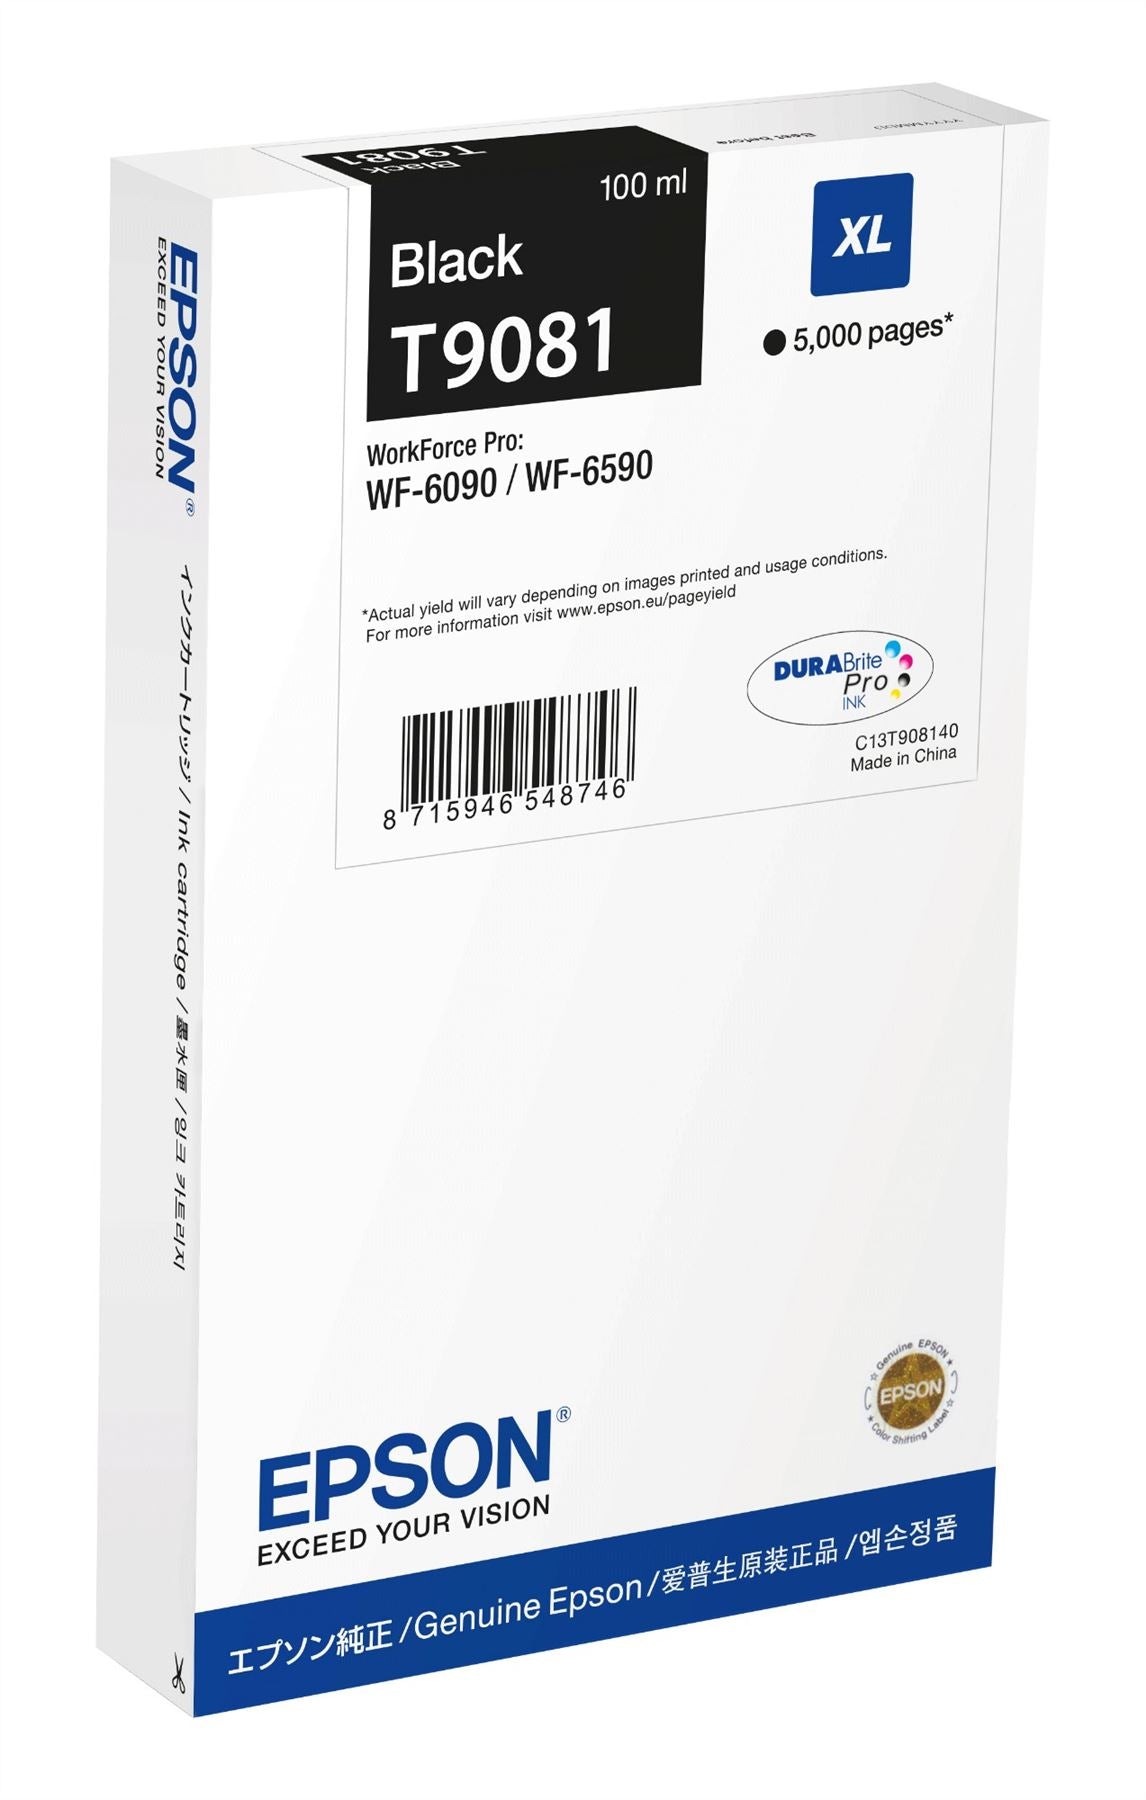 Epson C13T908140/T9081 Ink cartridge black XL, 5K pages 100ml for Epson WF 6090